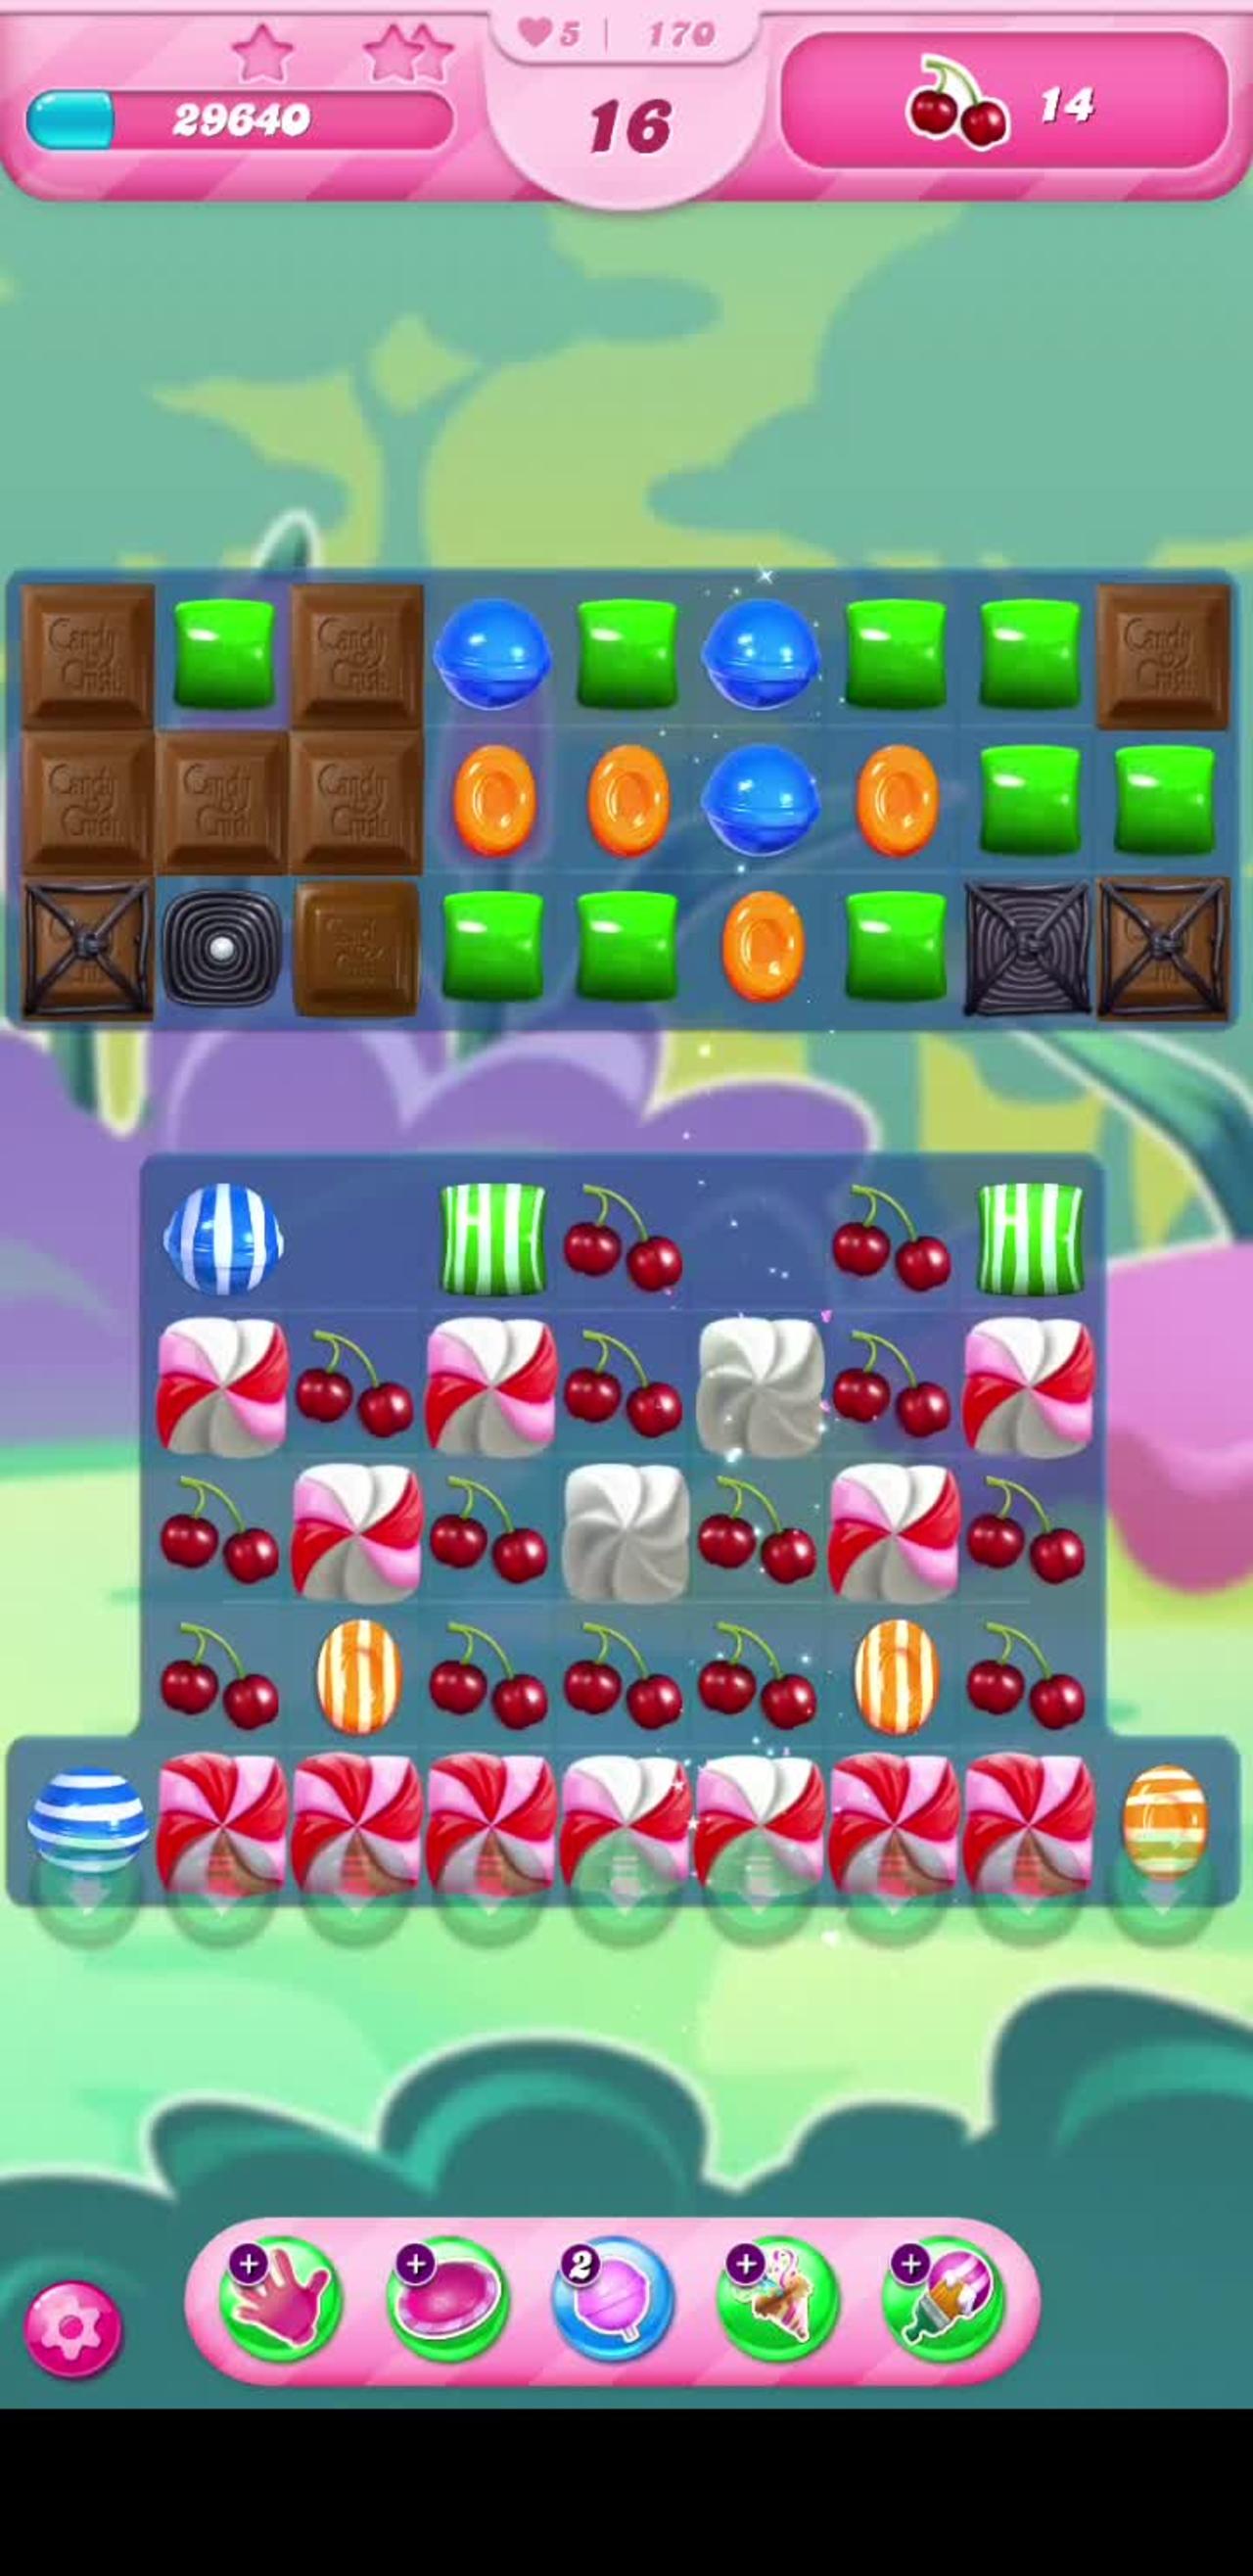 Candy crush Saga leveling complete video.